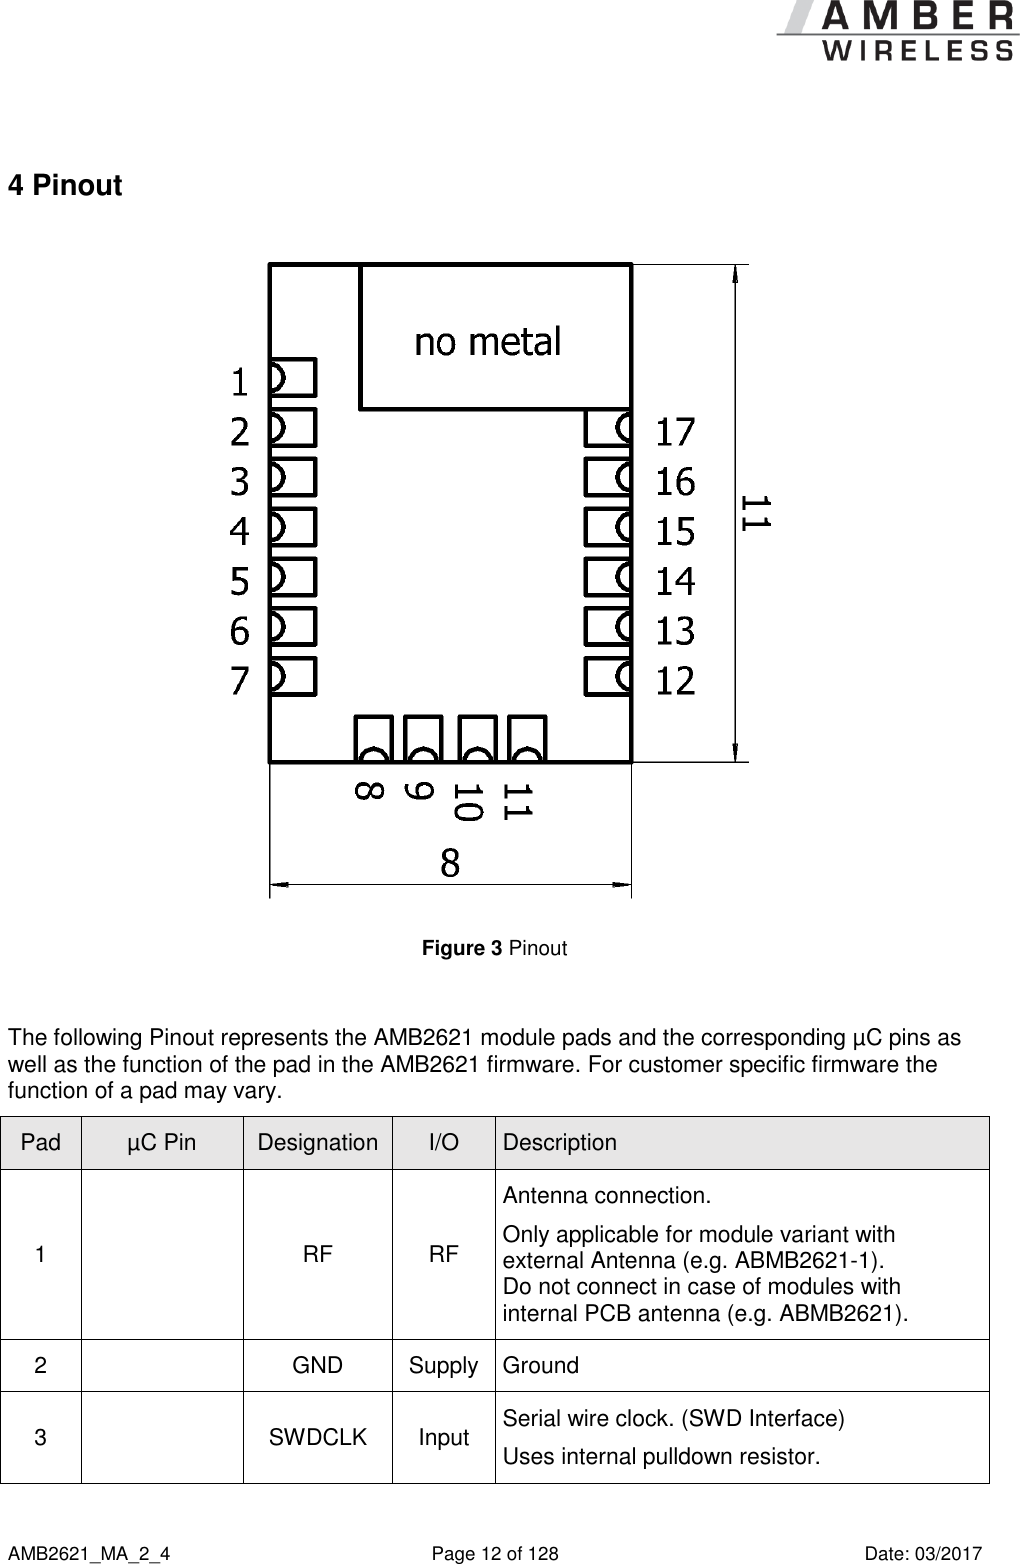      AMB2621_MA_2_4  Page 12 of 128  Date: 03/2017 4 Pinout  Figure 3 Pinout  The following Pinout represents the AMB2621 module pads and the corresponding µC pins as well as the function of the pad in the AMB2621 firmware. For customer specific firmware the function of a pad may vary. Pad µC Pin Designation I/O Description 1  RF RF Antenna connection. Only applicable for module variant with external Antenna (e.g. ABMB2621-1). Do not connect in case of modules with internal PCB antenna (e.g. ABMB2621). 2  GND Supply Ground 3  SWDCLK Input Serial wire clock. (SWD Interface) Uses internal pulldown resistor. 